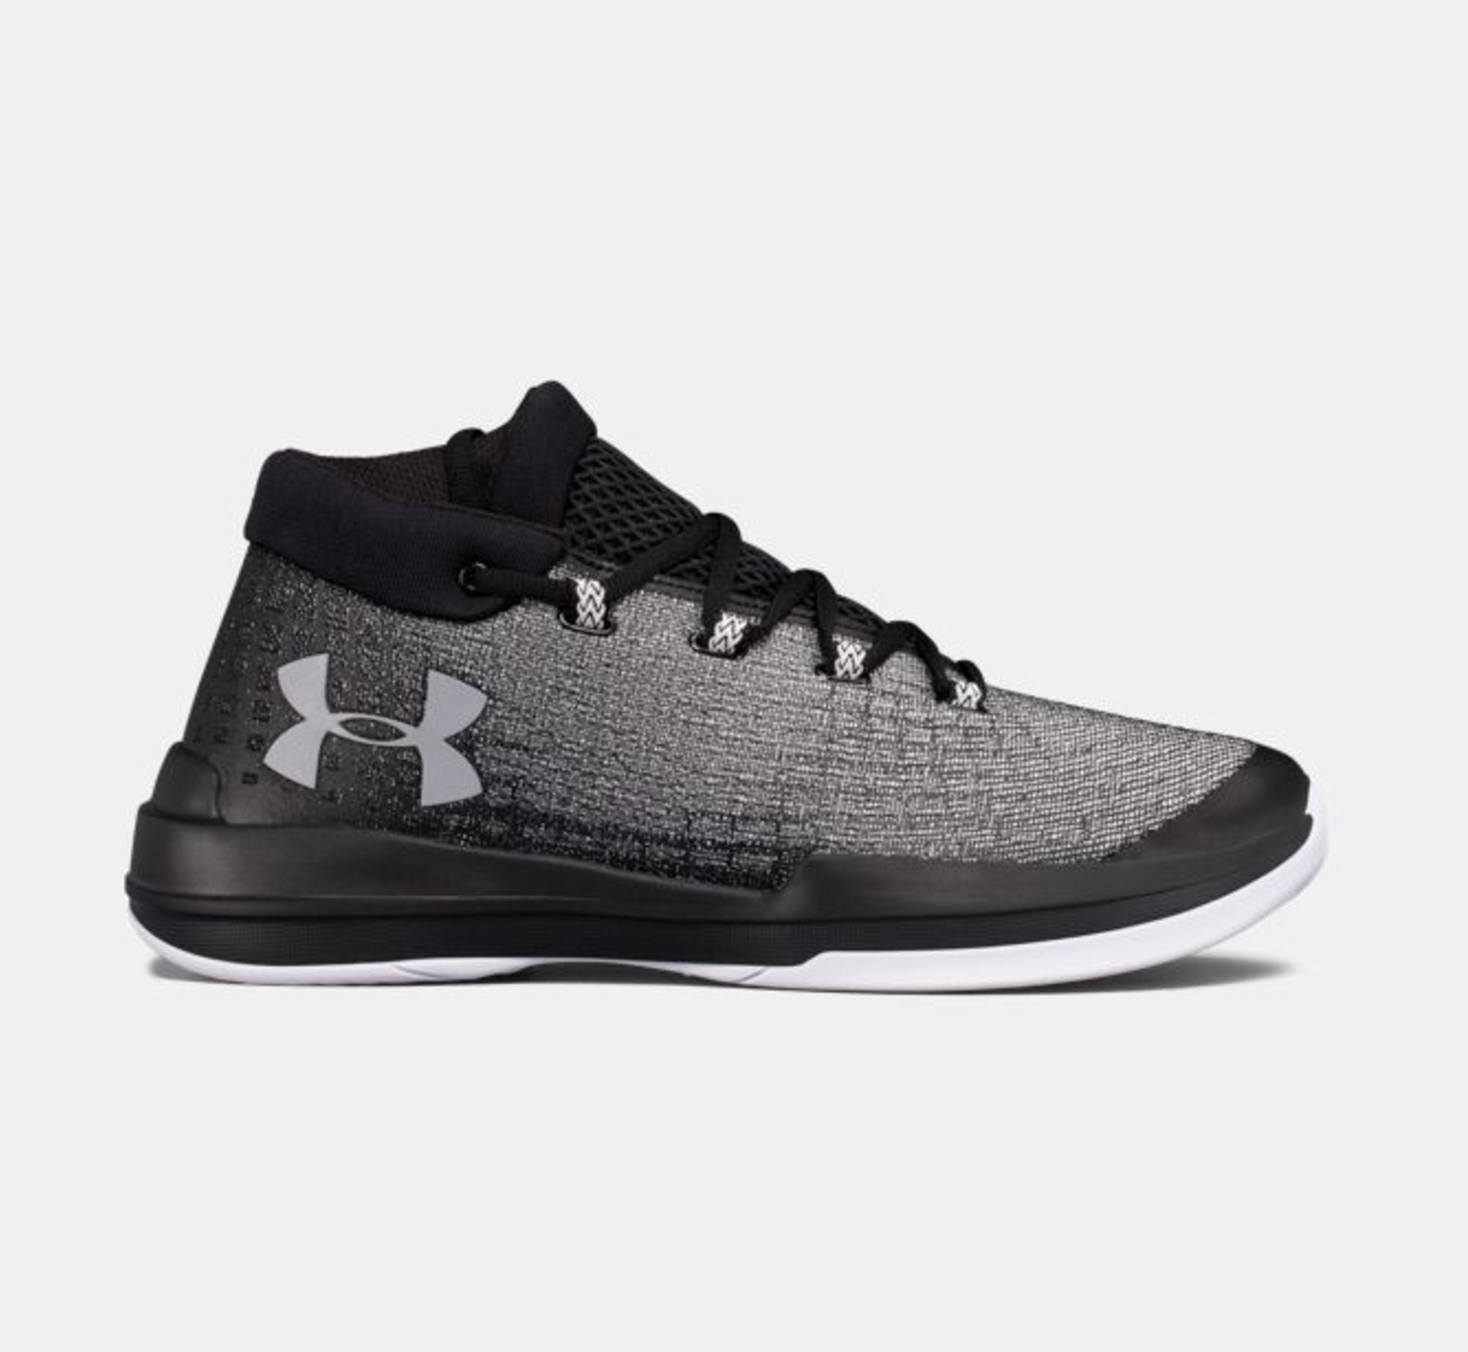 Under Armour Launches the UA Team NXT 